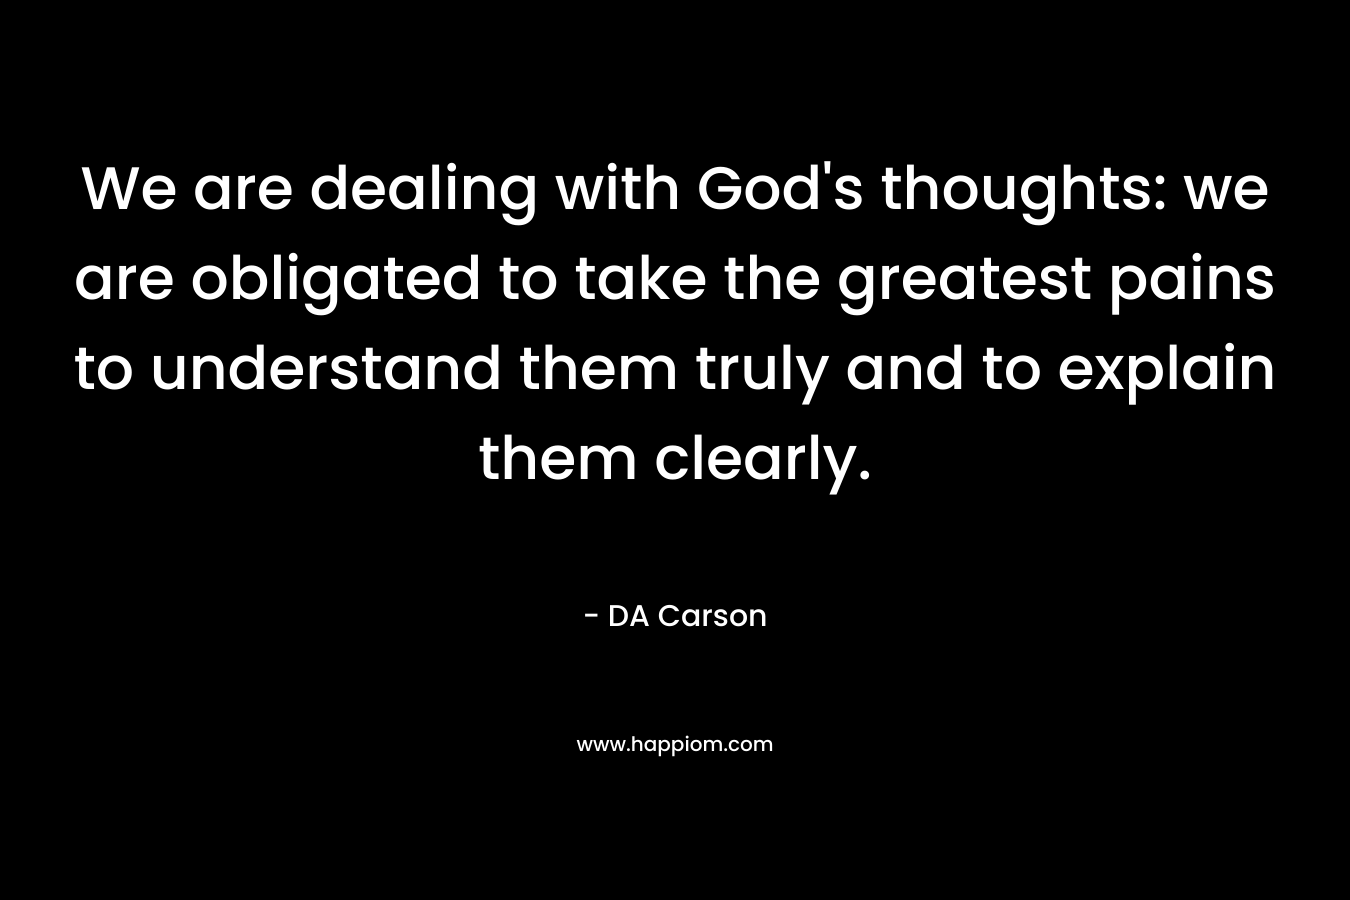 We are dealing with God's thoughts: we are obligated to take the greatest pains to understand them truly and to explain them clearly.